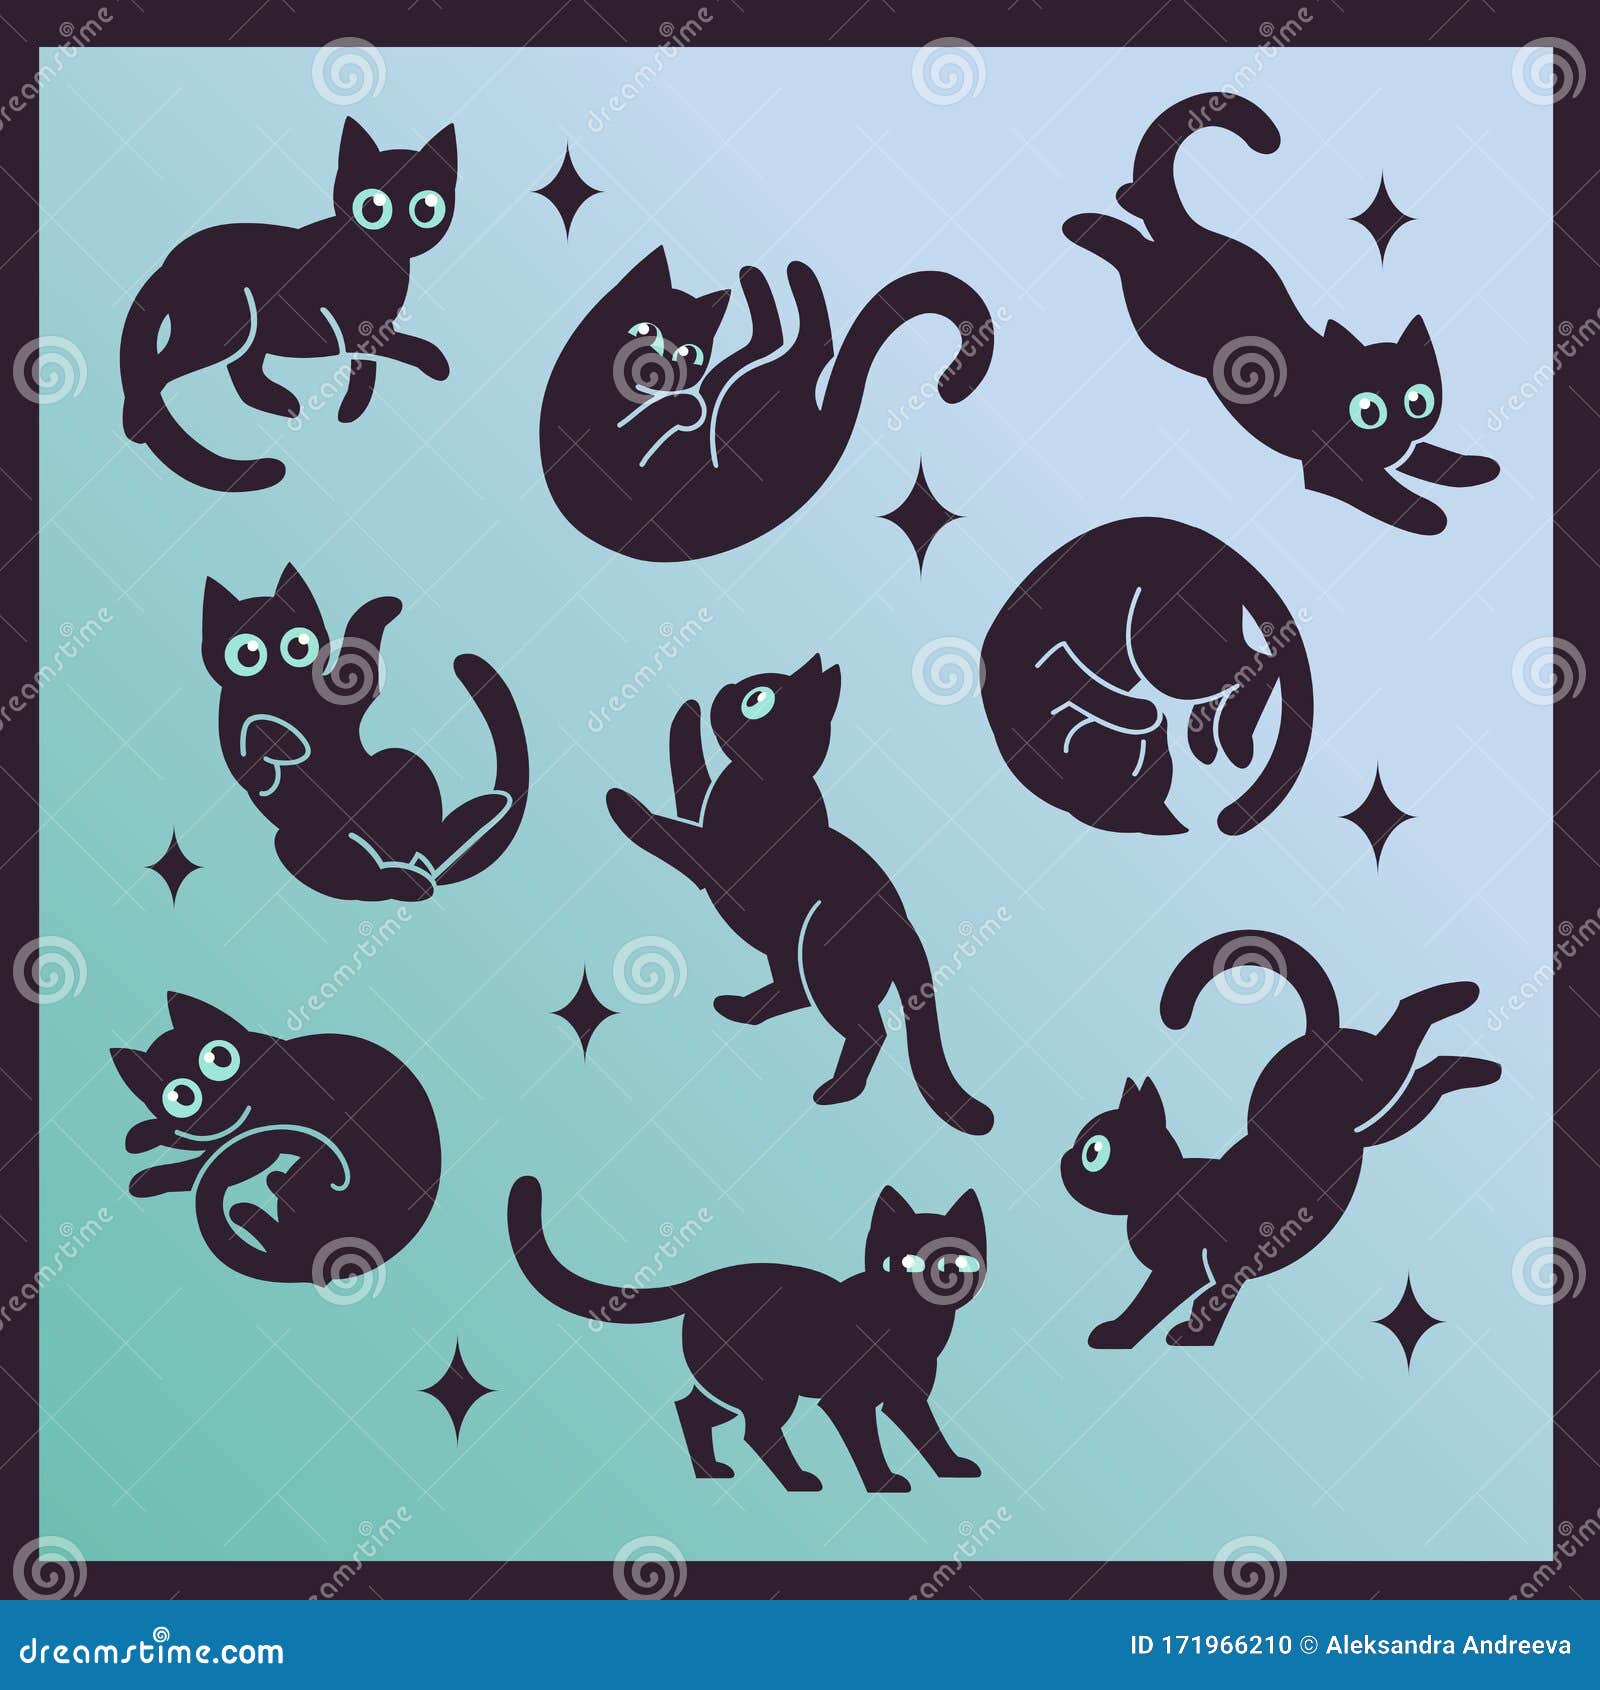 frisky black cats in different poses